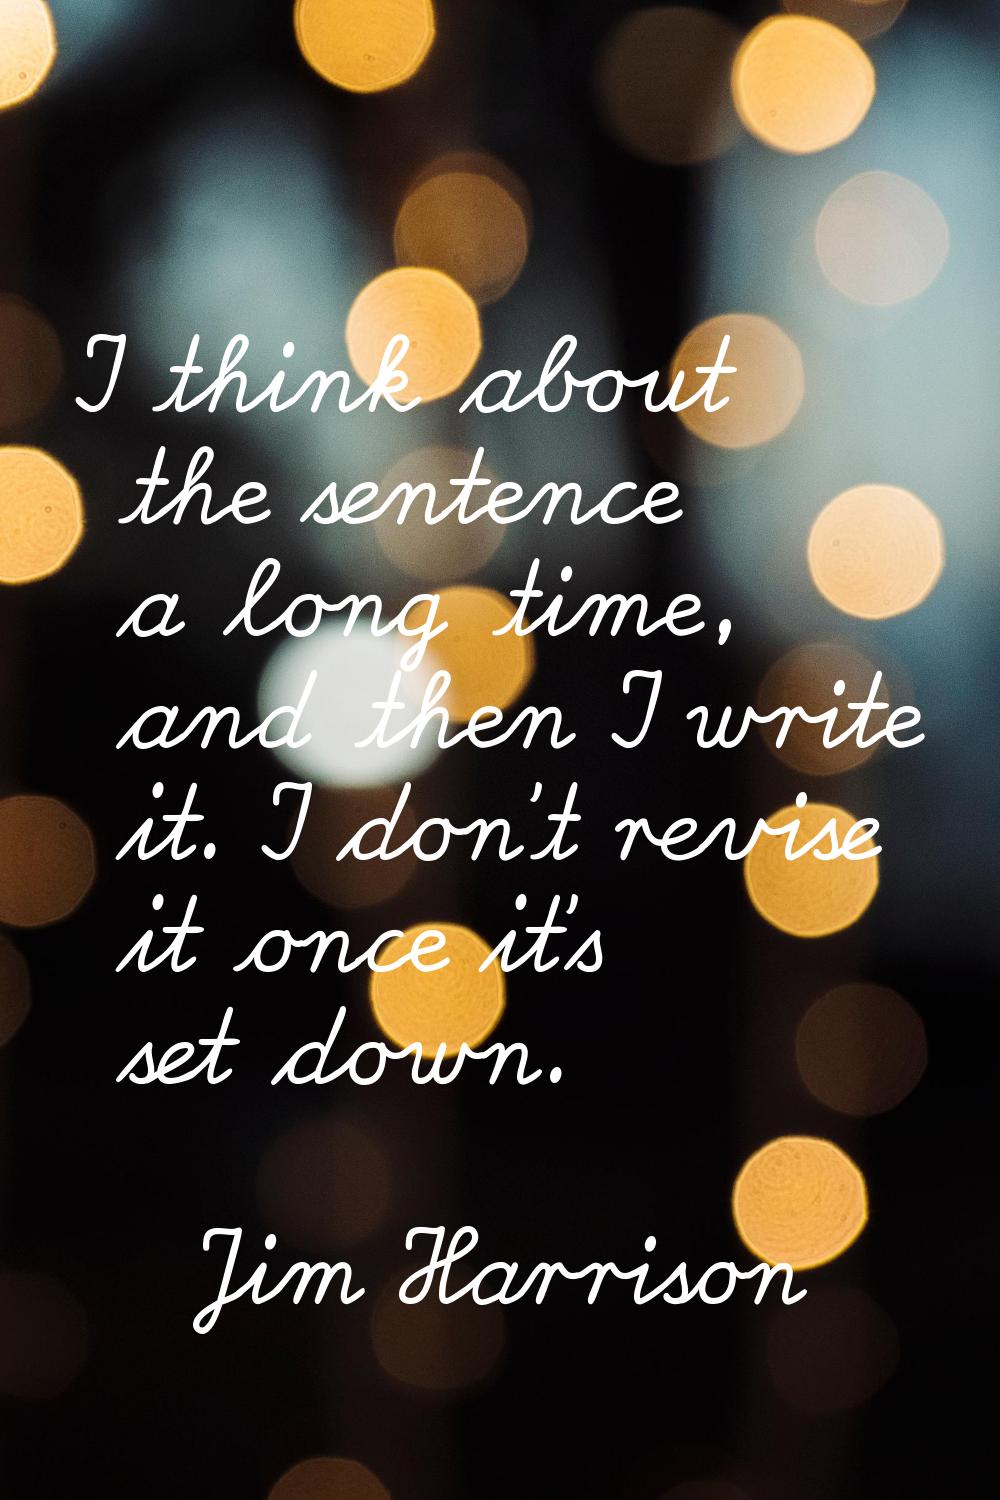 I think about the sentence a long time, and then I write it. I don't revise it once it's set down.